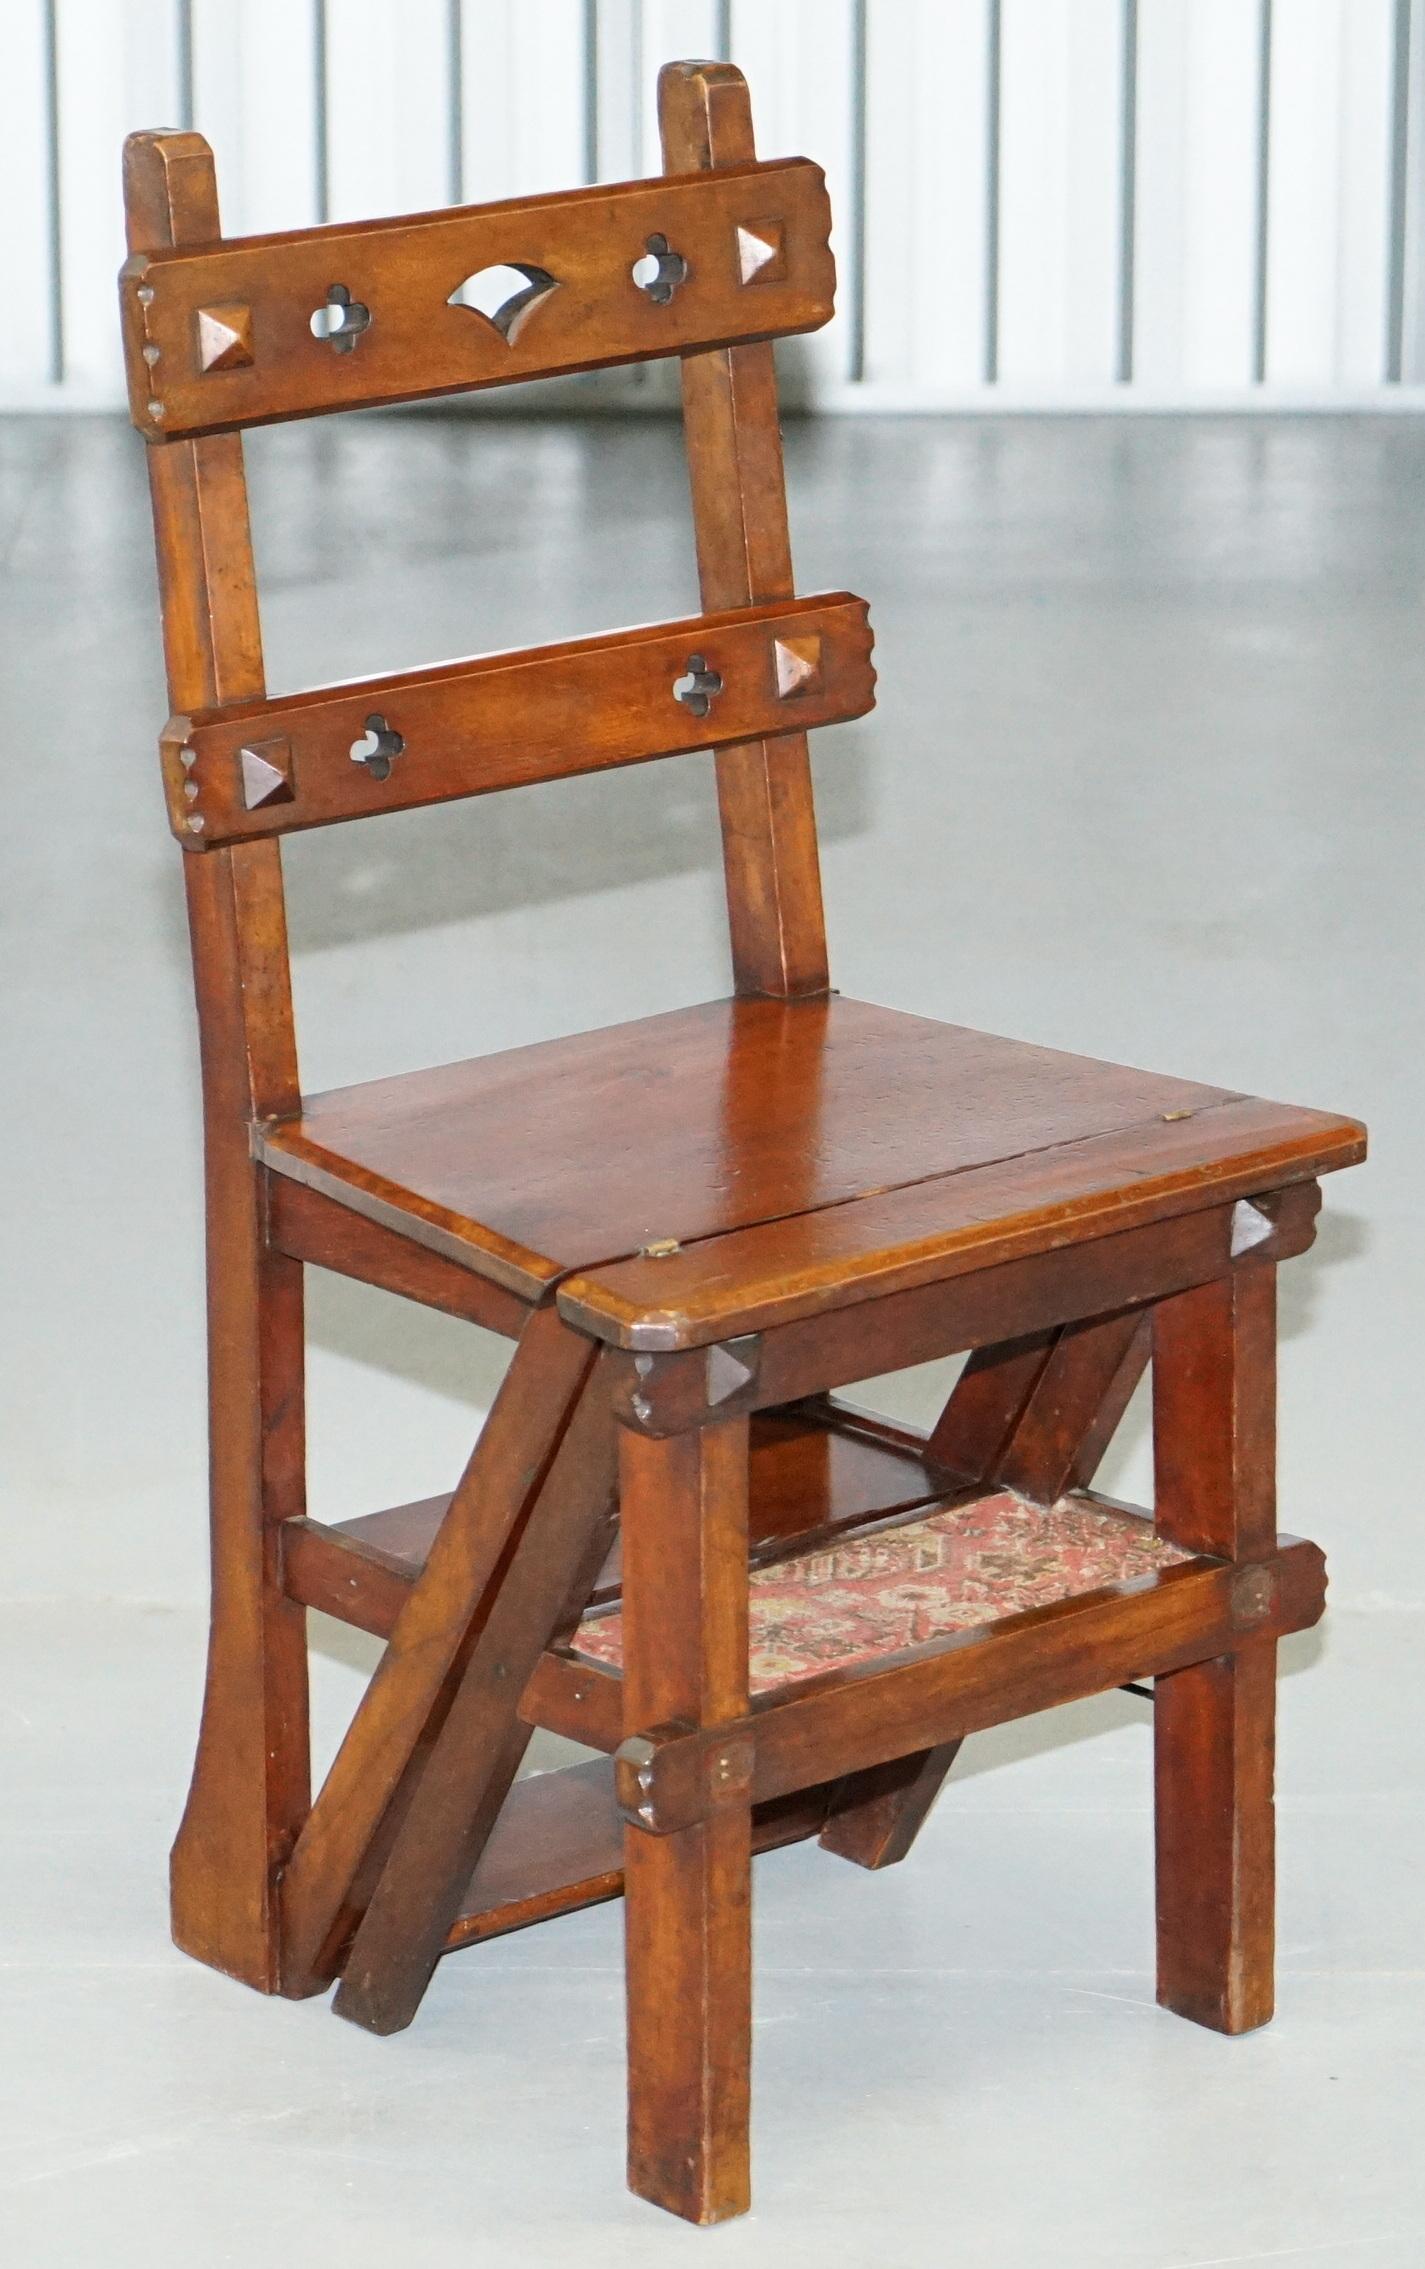 We are delighted to offer for sale this stunning Arts & Crafts circa 1890 English oak metamorphic library steps chair with carpet upholstery to the step side

A very good looking and well made piece, this is an early version of this chair, it was